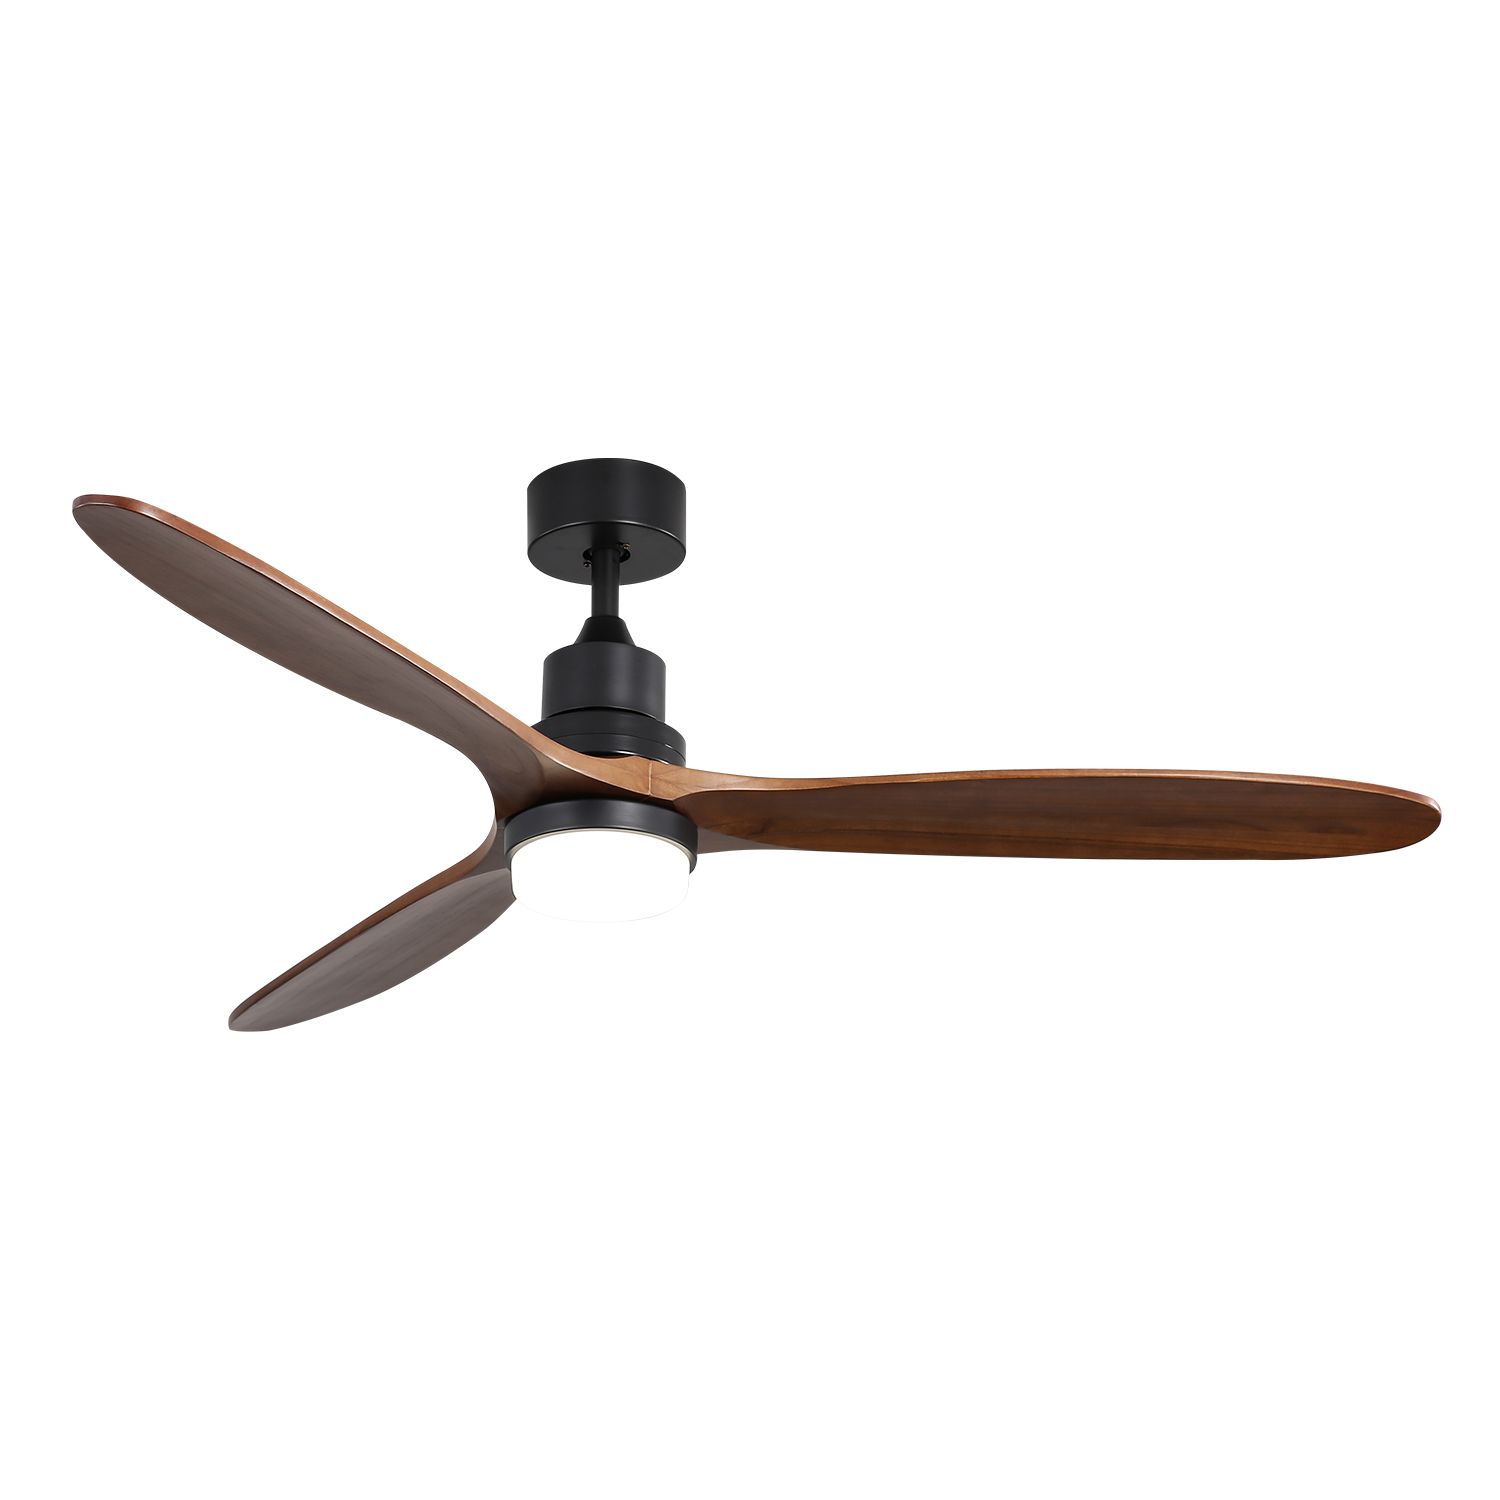 KBS 60 inch Wood Design Reversible Ceiling Fan with Remote and lights